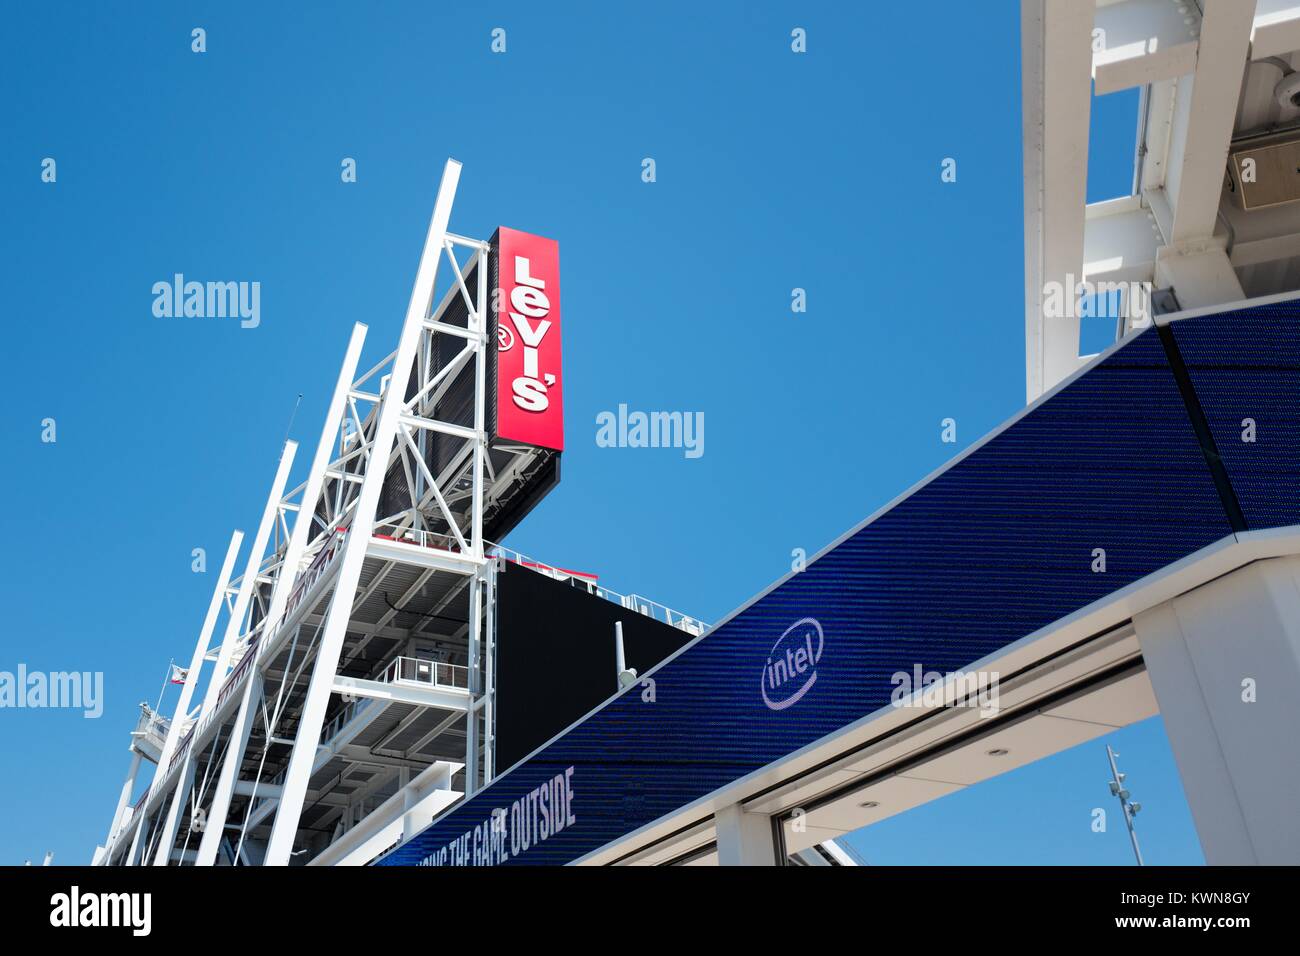 LED sign with Intel logo at Levi's Stadium, home to the San Francisco 49ers football team, in the Silicon Valley town of Santa Clara, California, July 25, 2017. Stock Photo